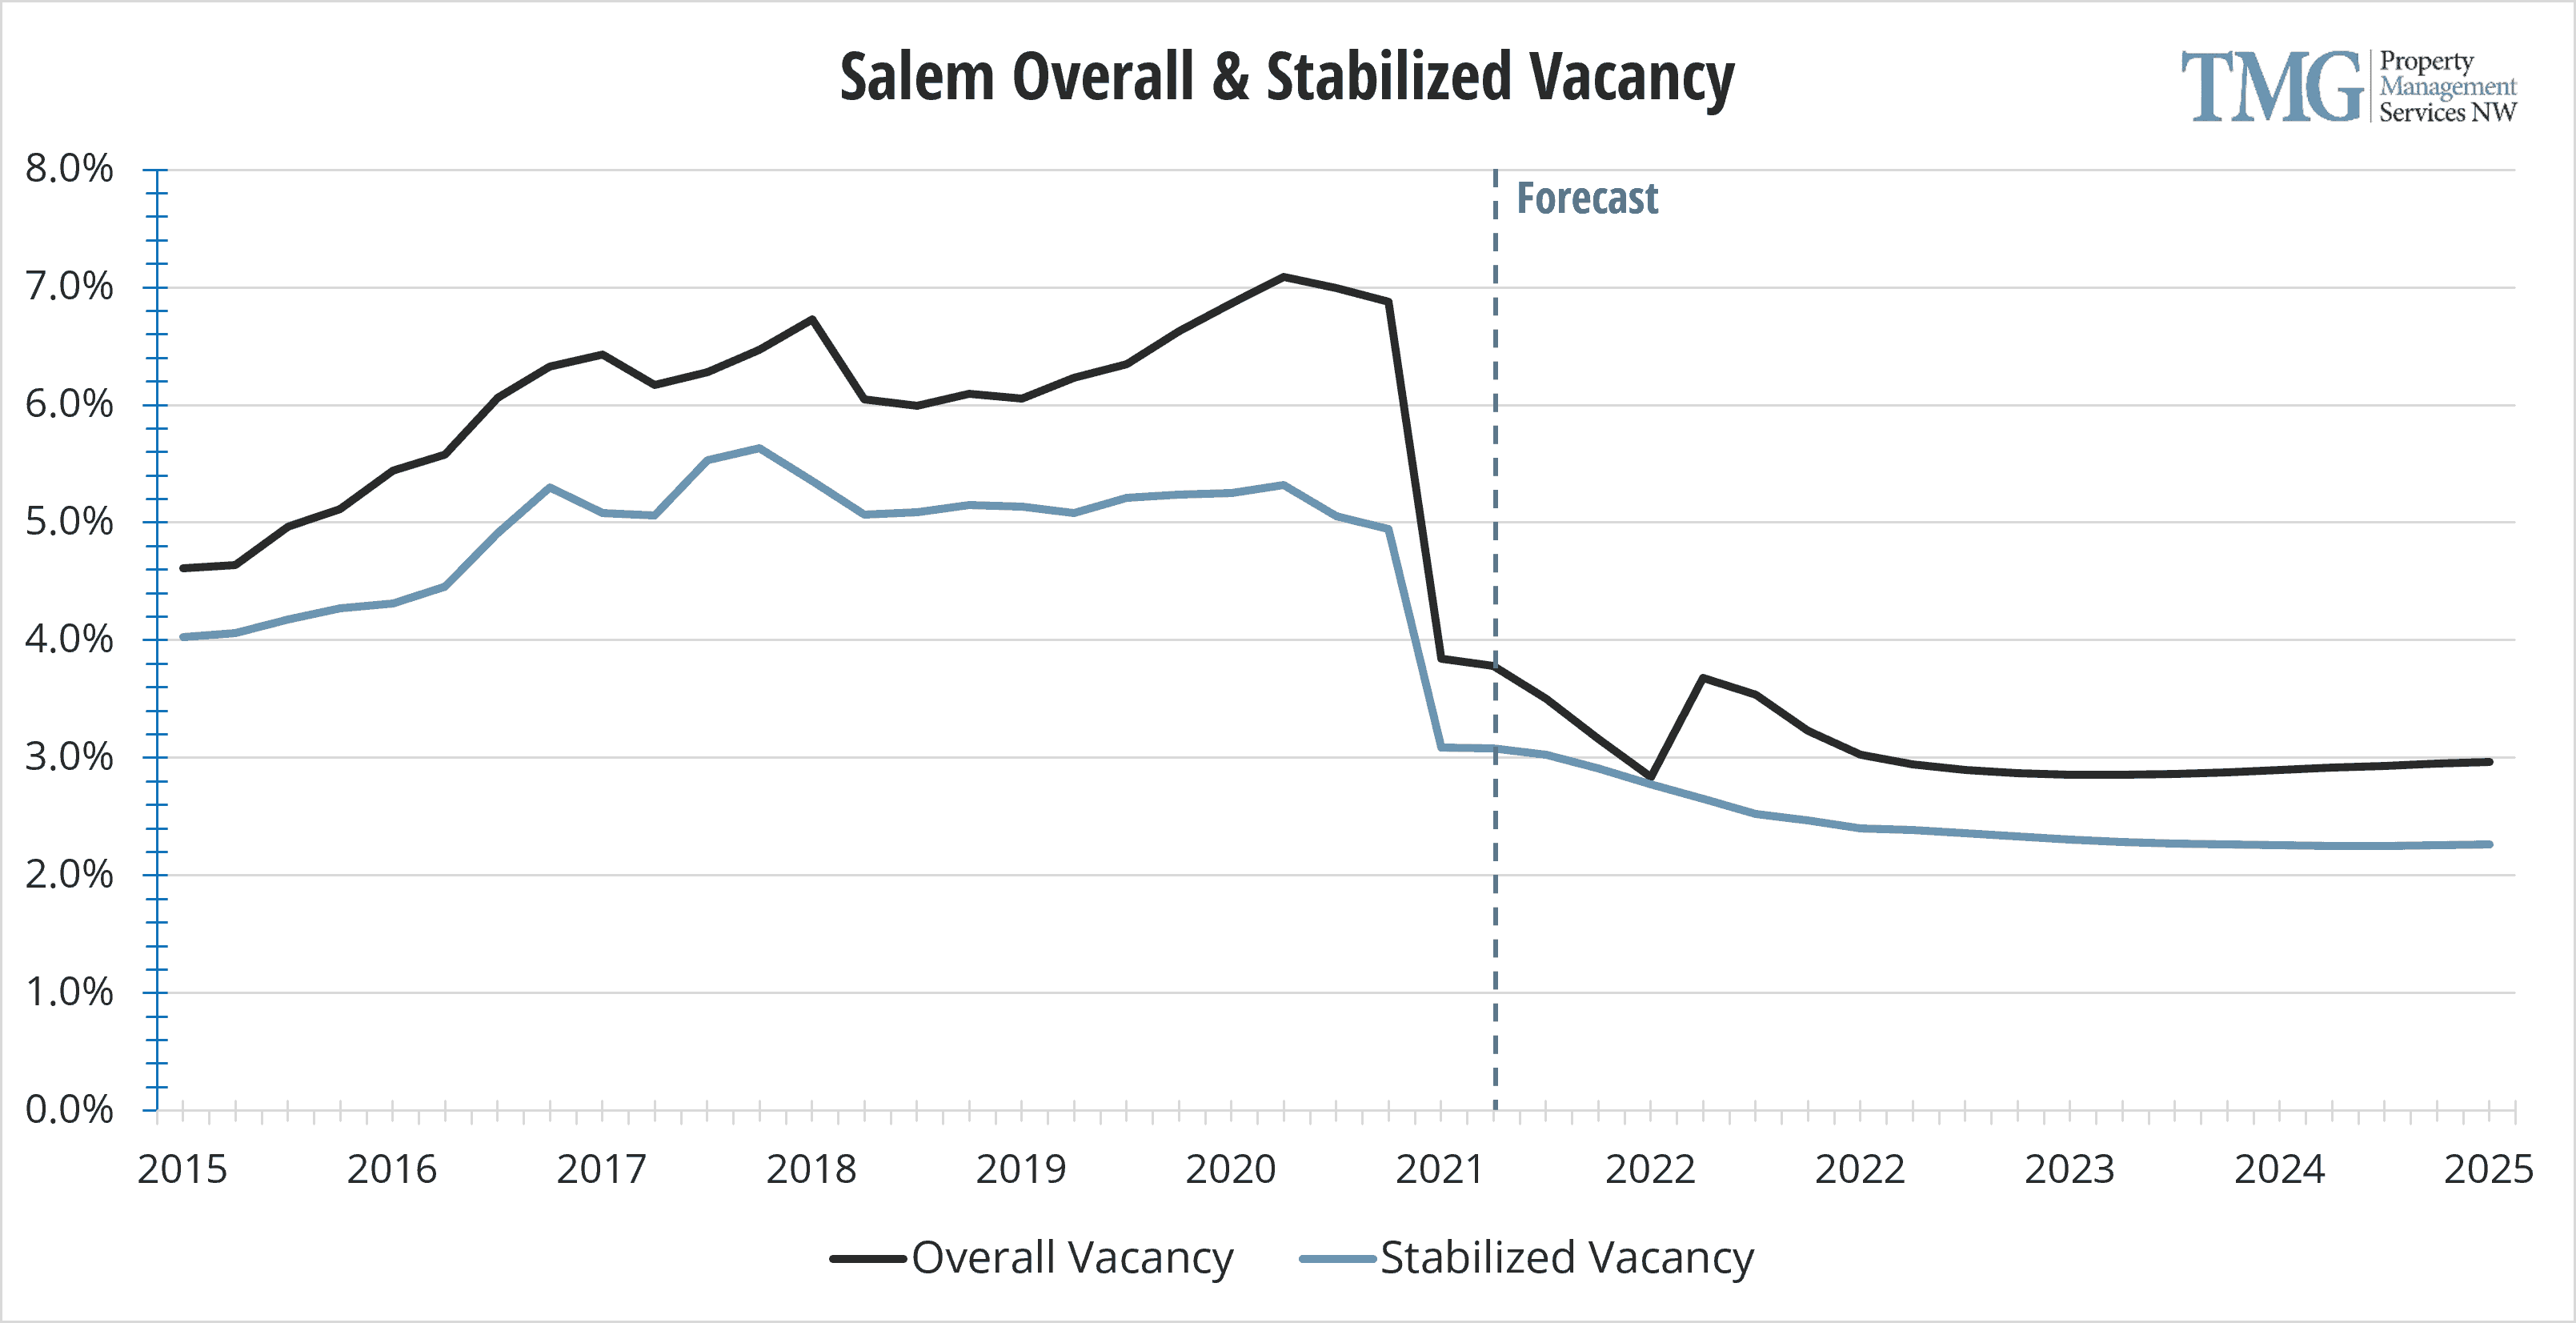 Salem Q1 2021 Overall & Stabilized Vacancy